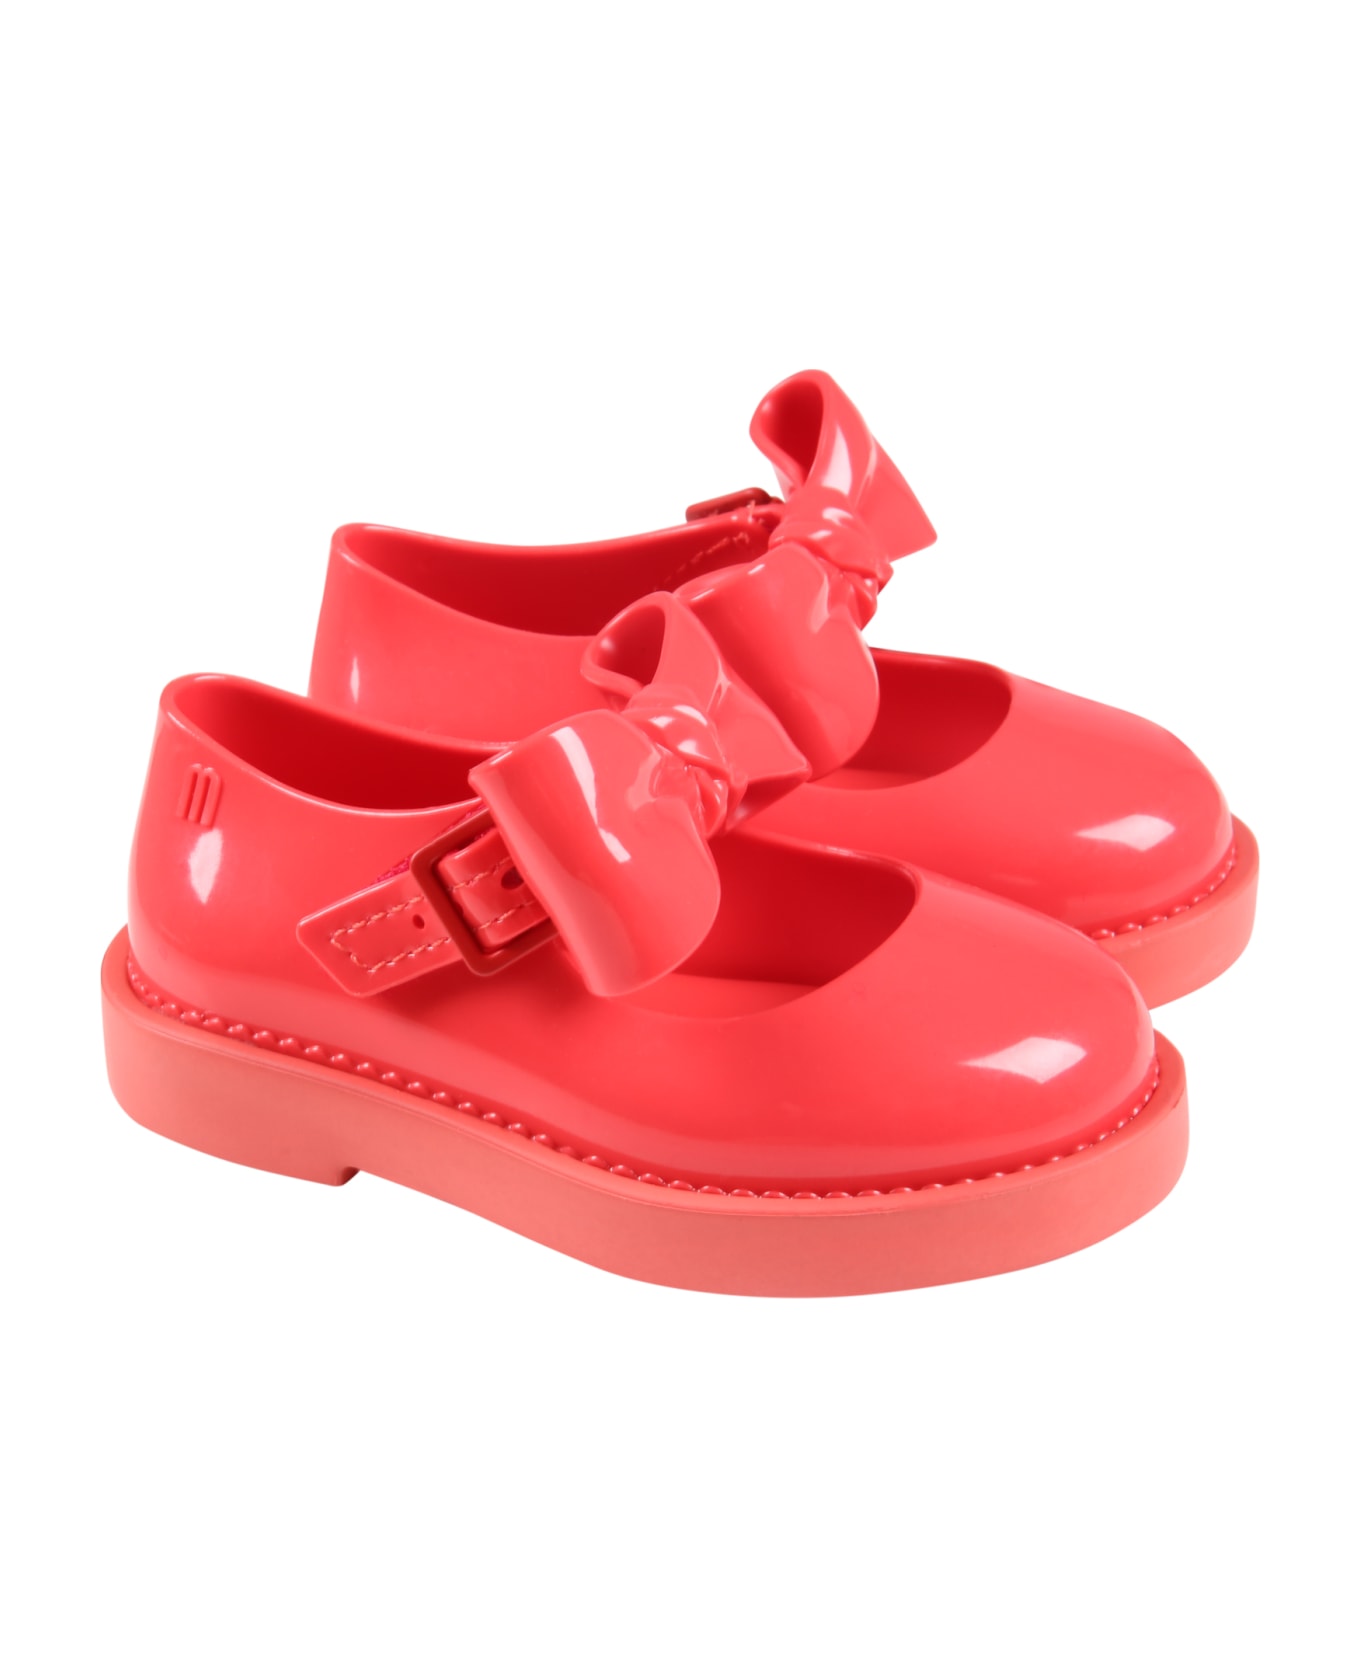 Melissa Red Ballerina Flats For Girl With Bow - Red